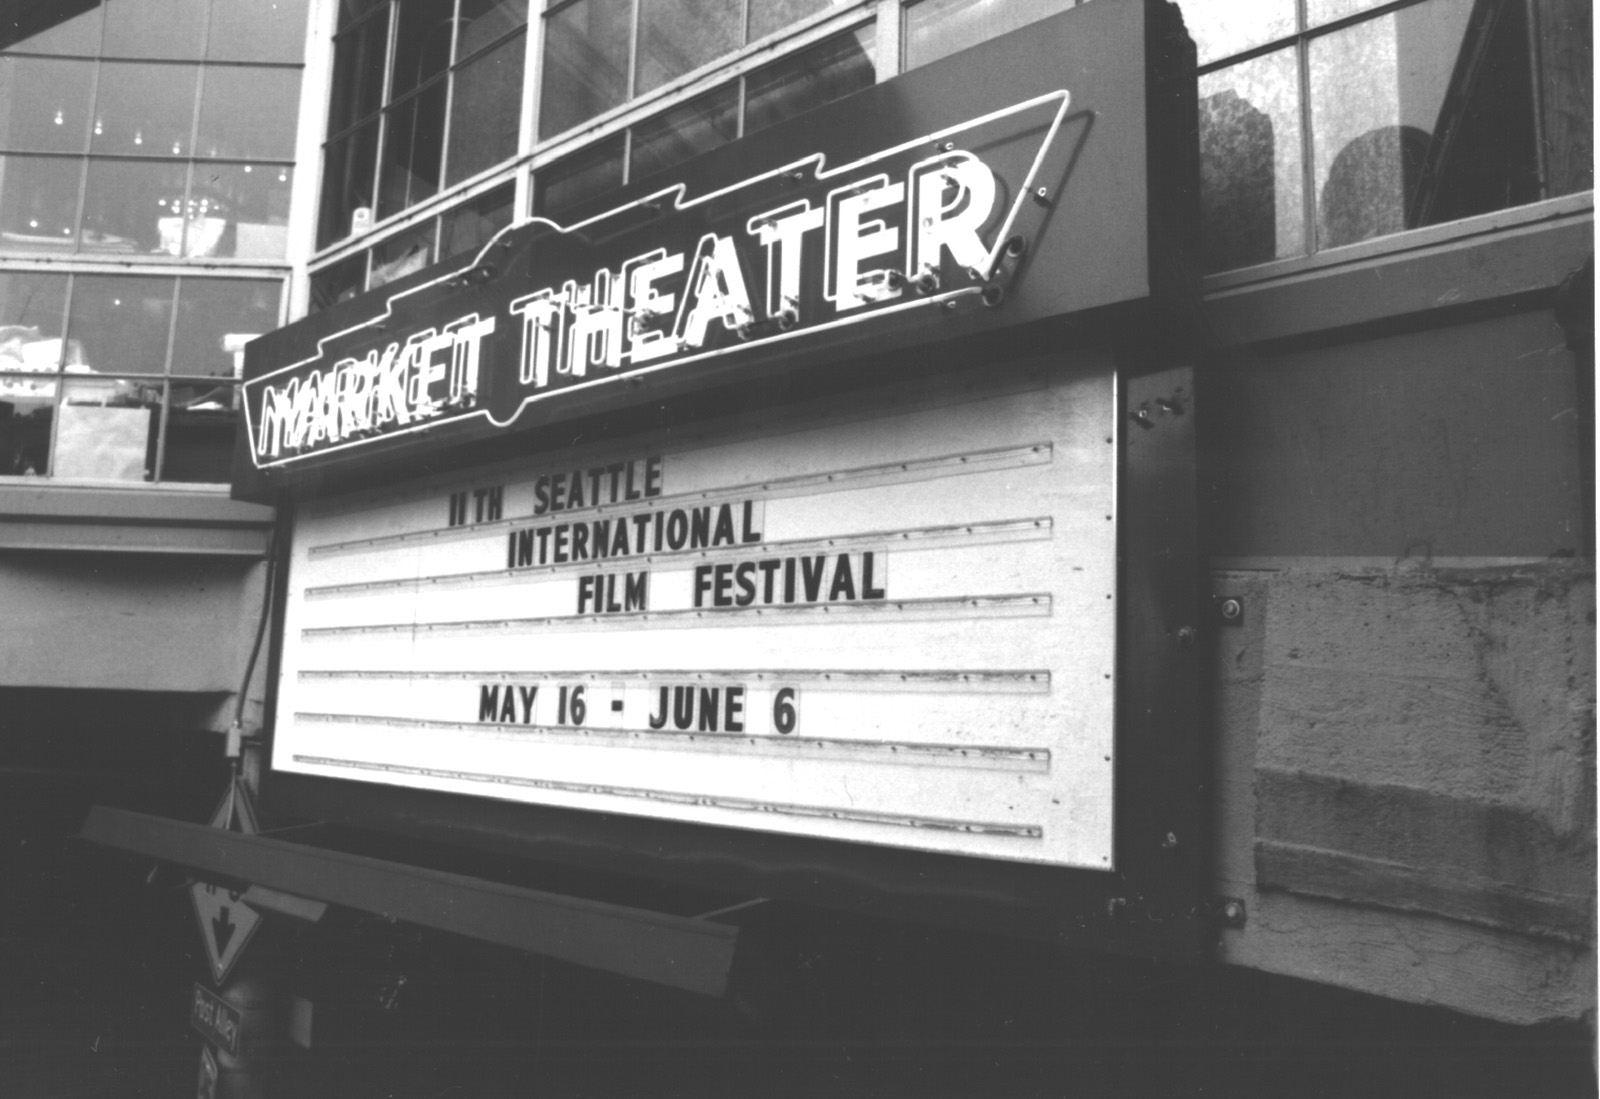 The Market Theatre (added as a venue in 1985) celebrates the 11th Seattle International Film Festival